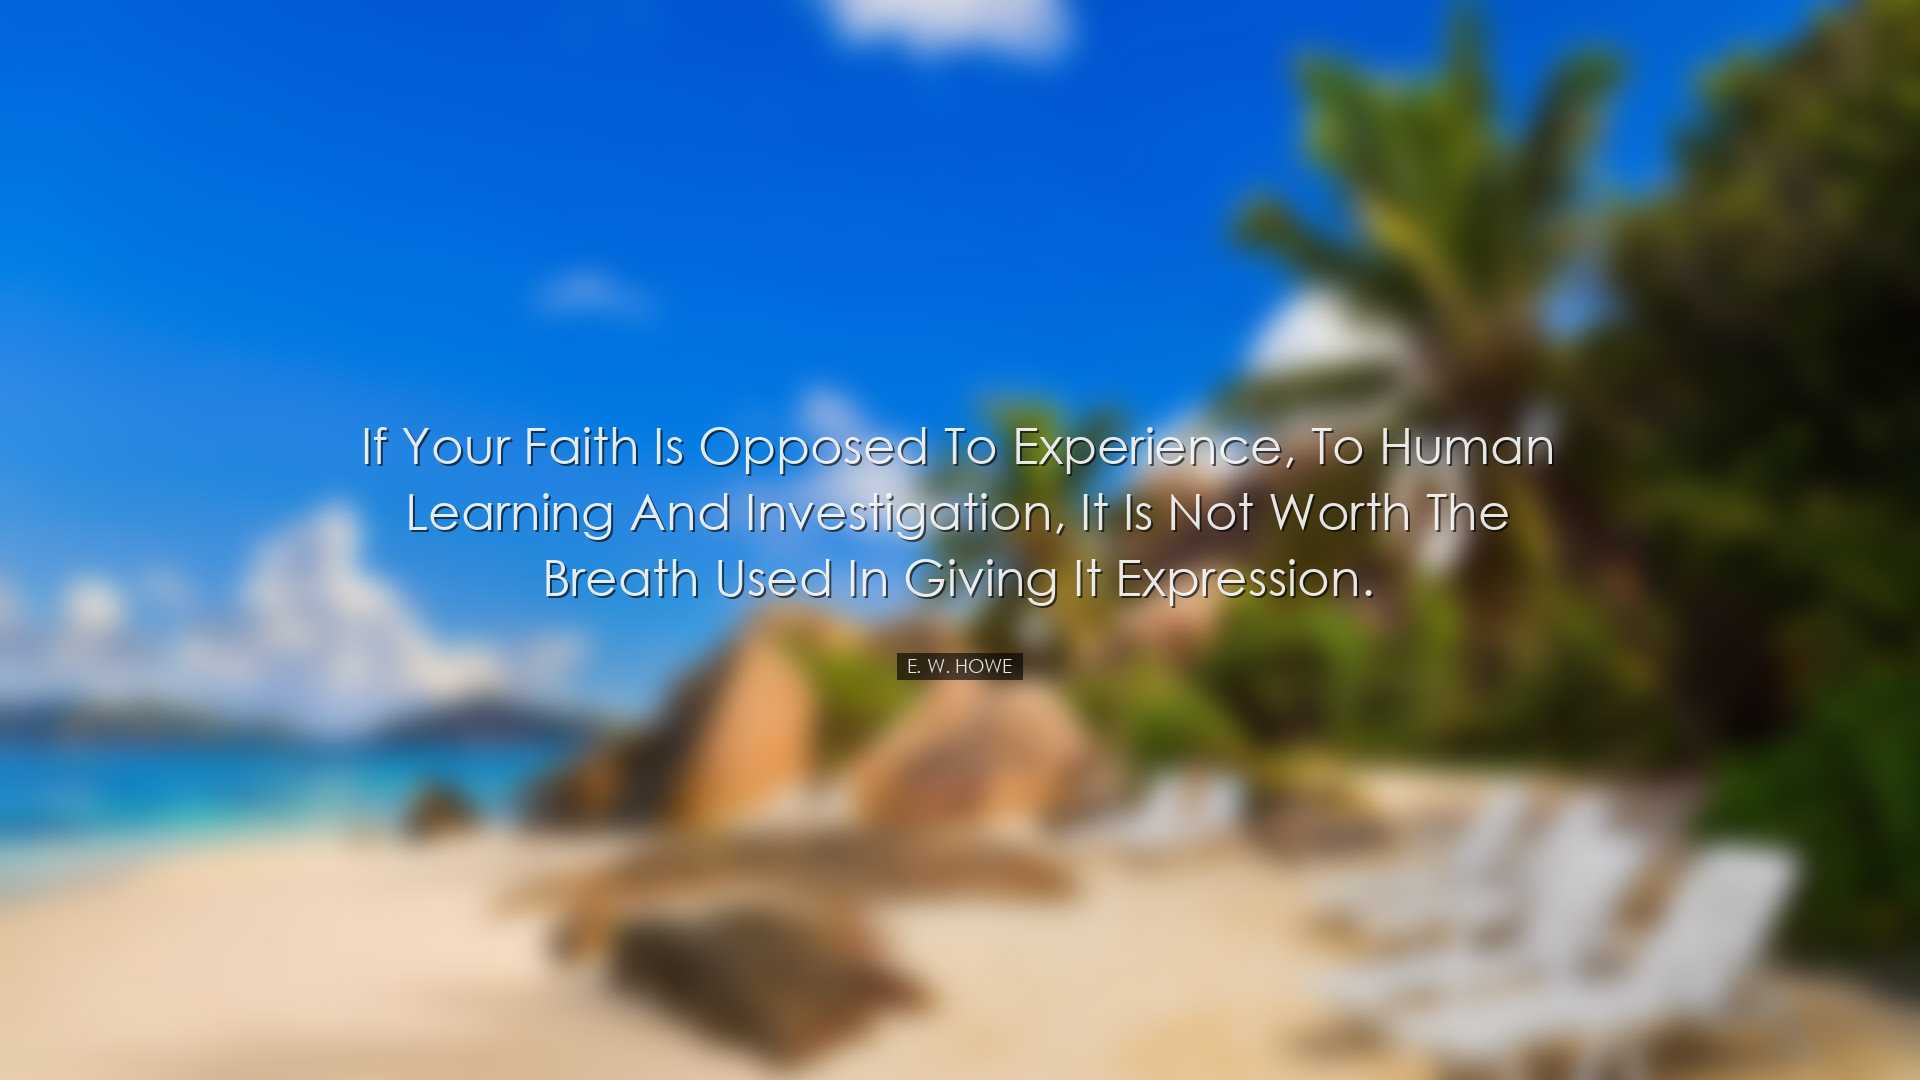 If your faith is opposed to experience, to human learning and inve